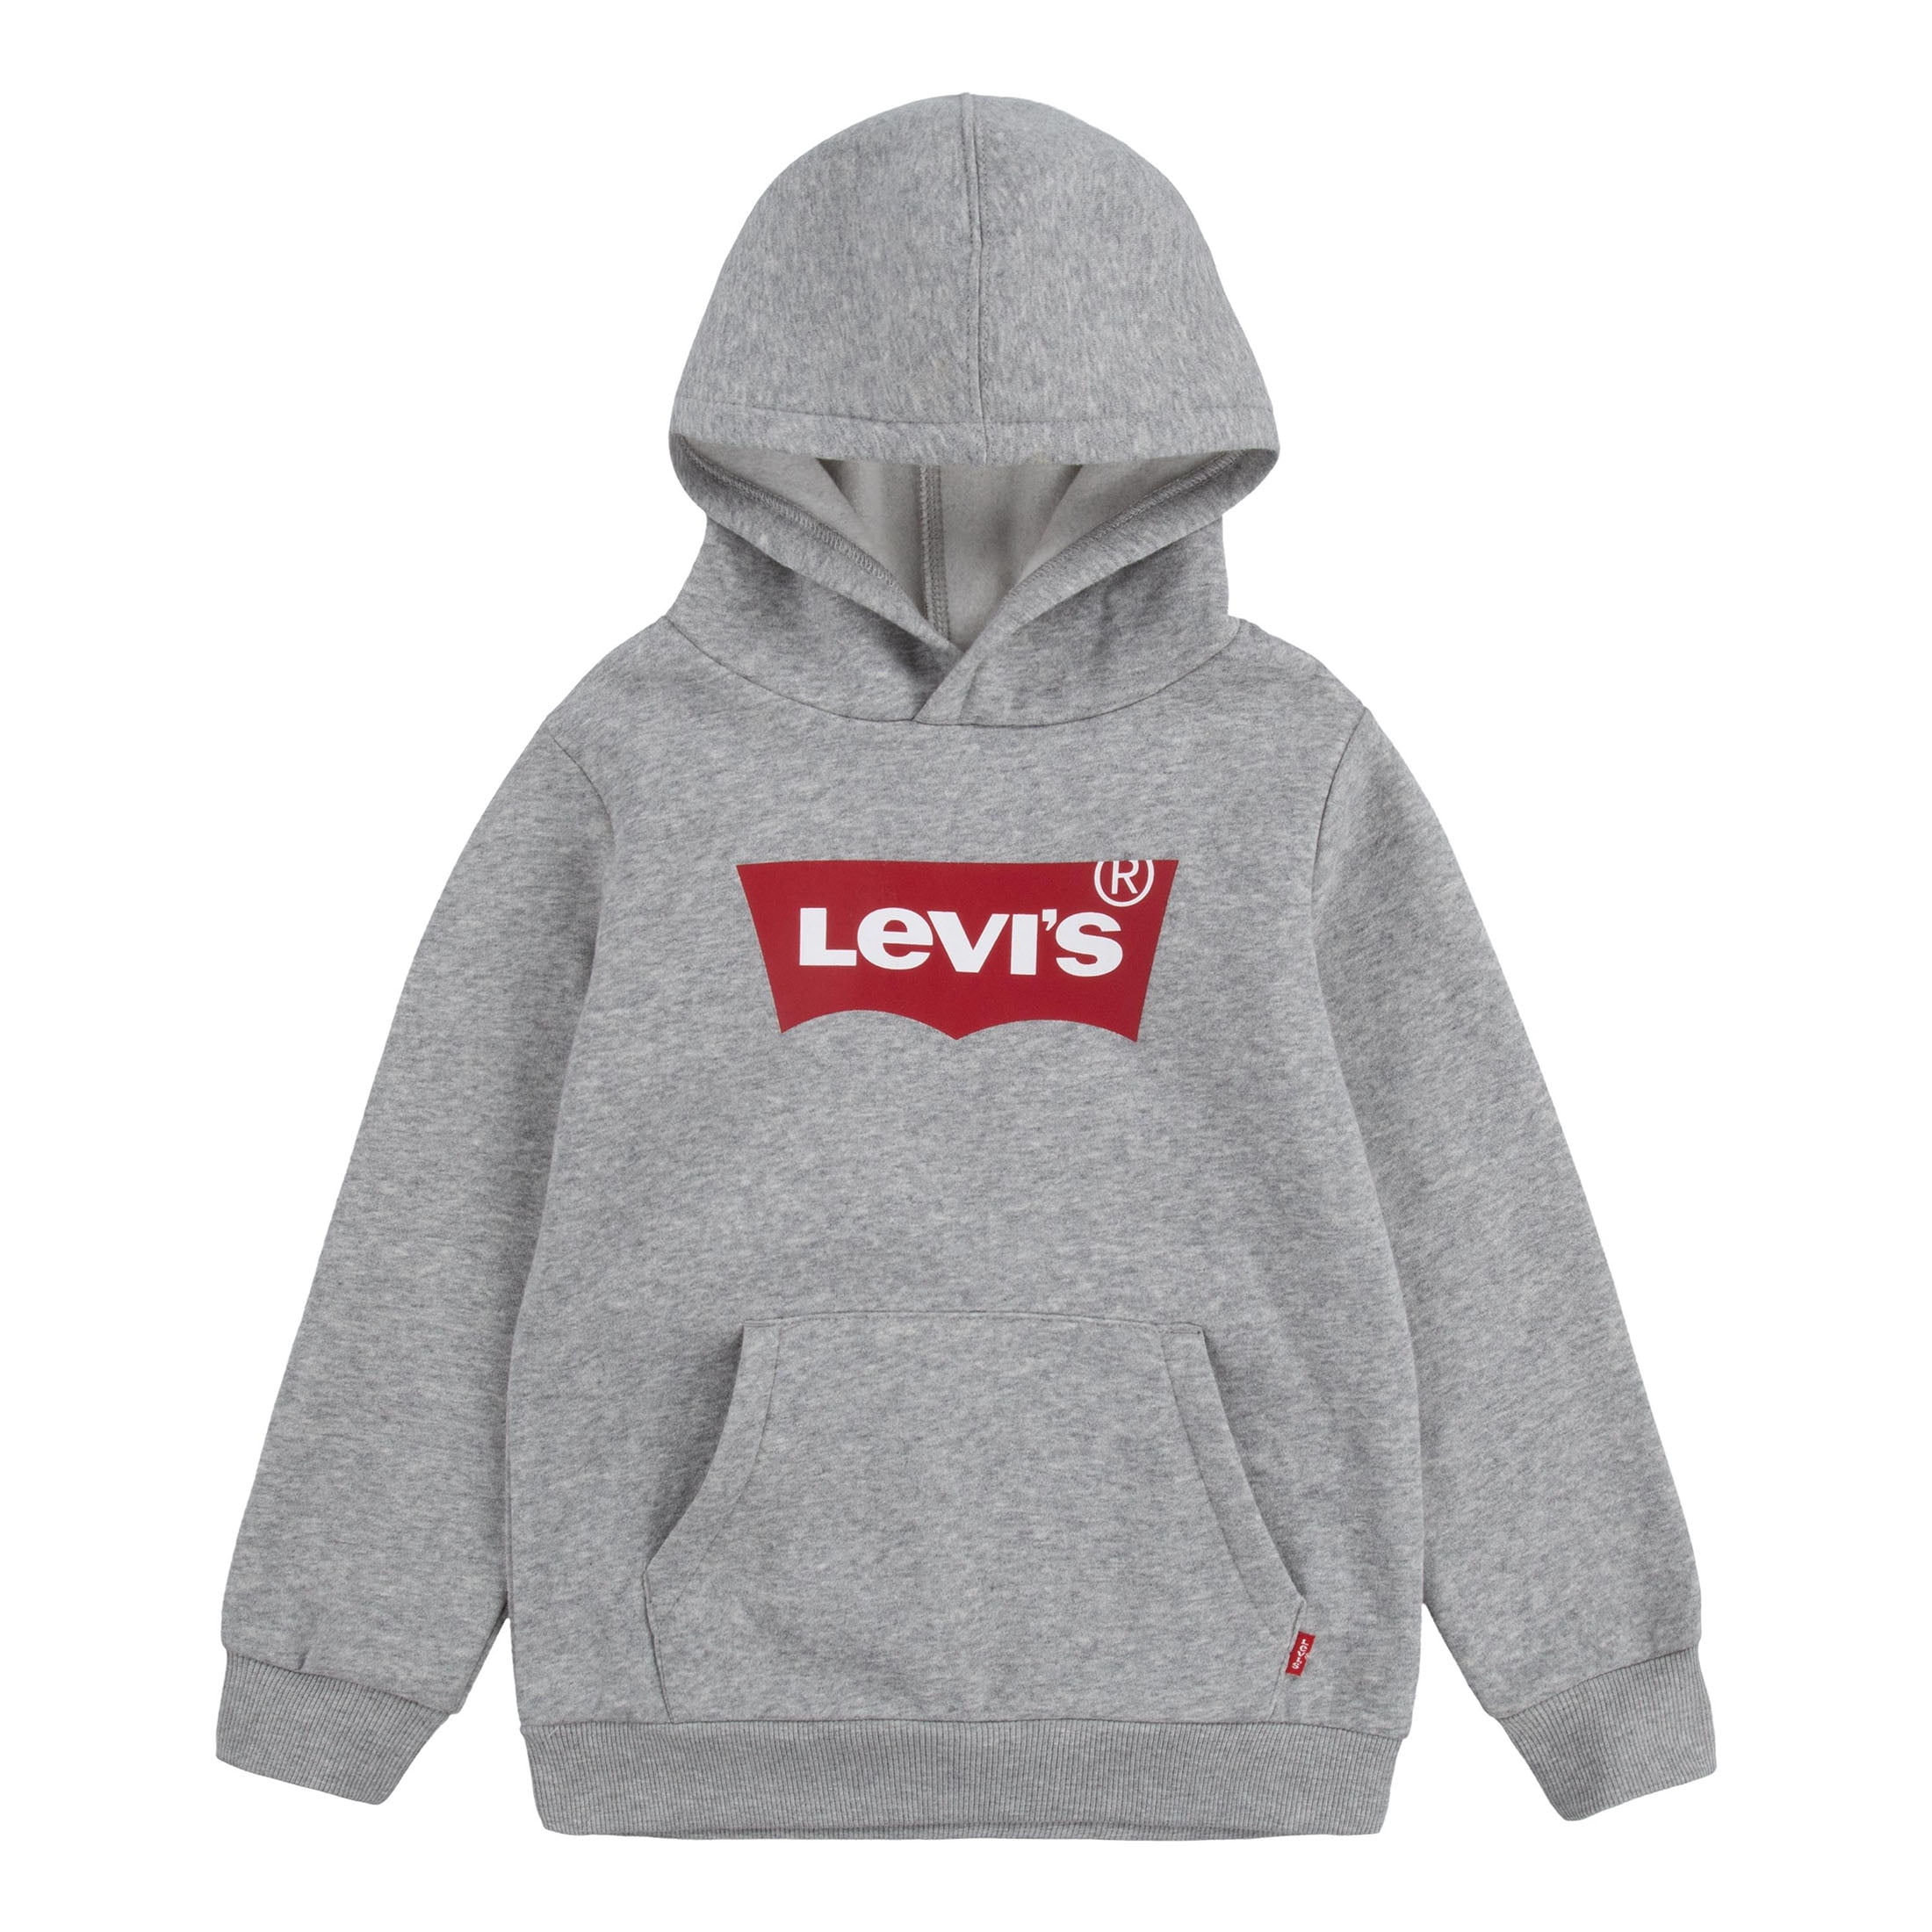 Levi's Boys' Pullover Hoodie, Sizes 4-18 